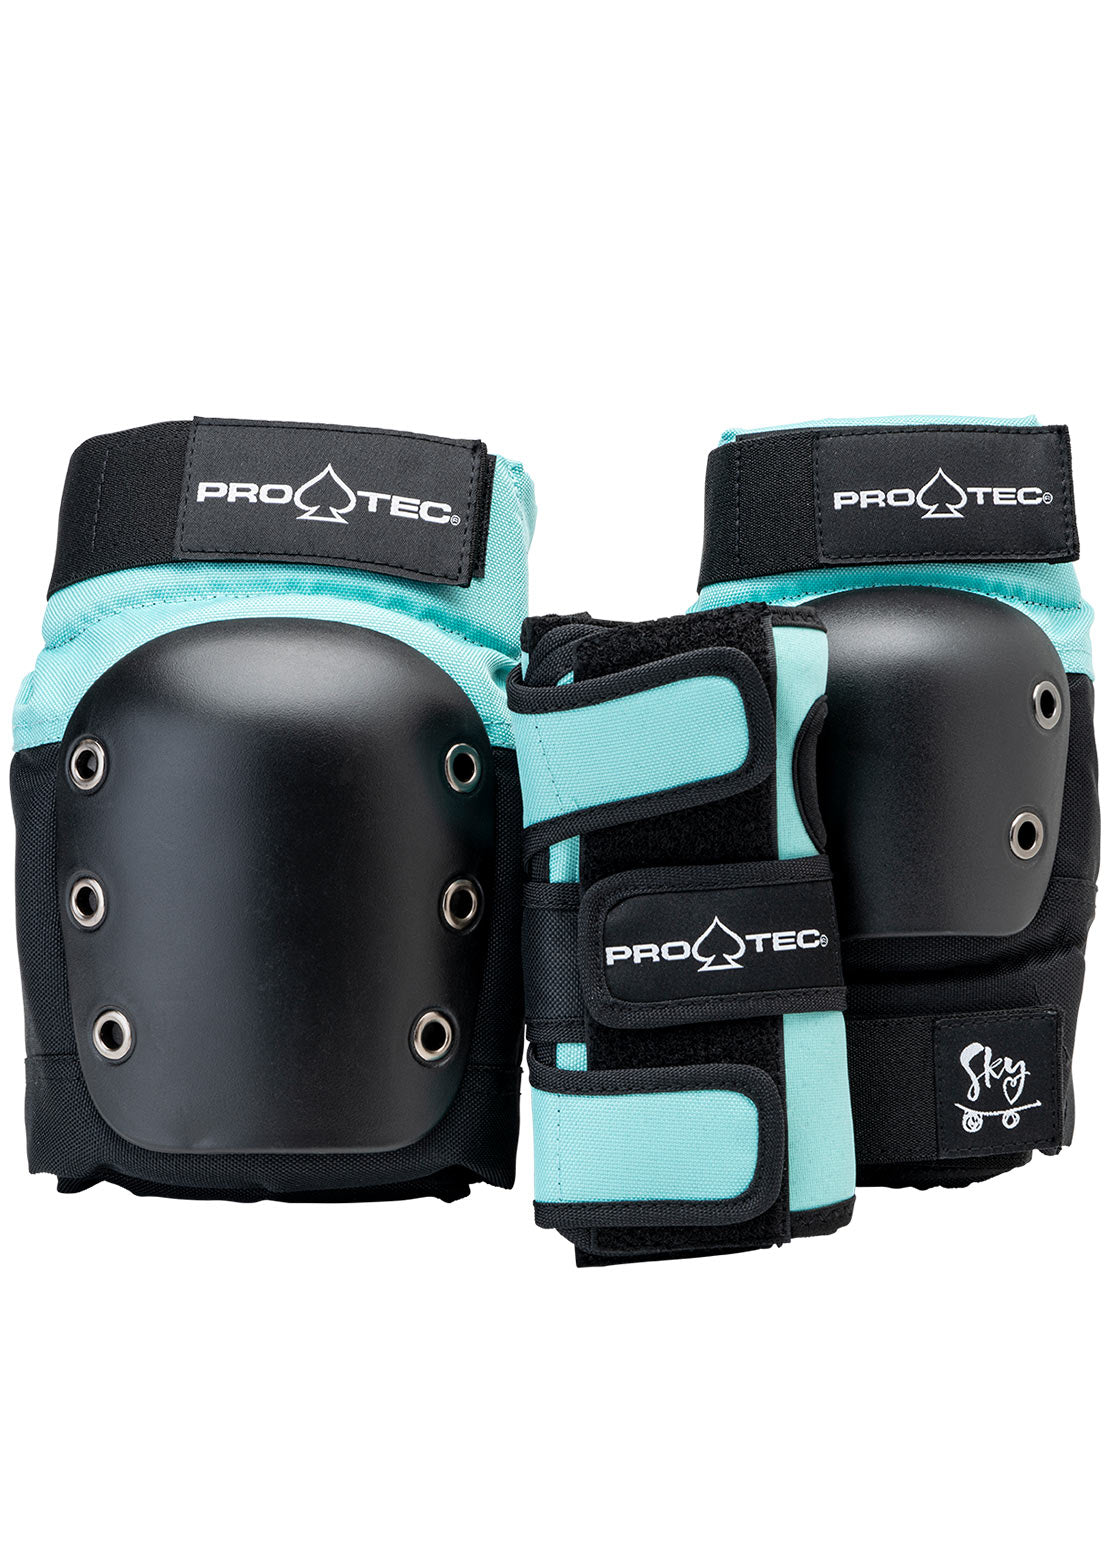 Pro-Tec Junior Street Gear 3 Pack Pads Protection Sky Brown